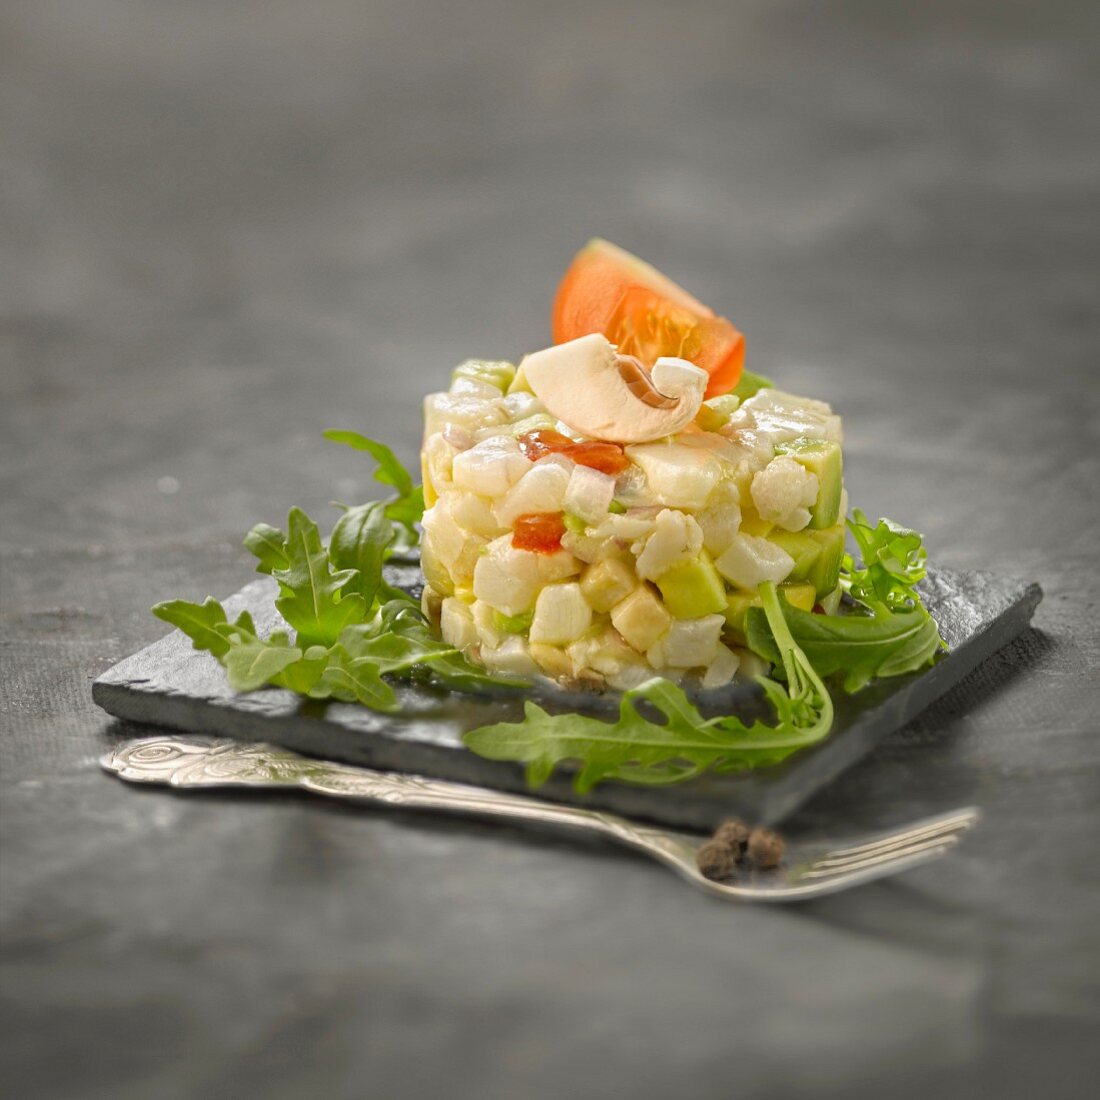 Fish and vegetable tartare